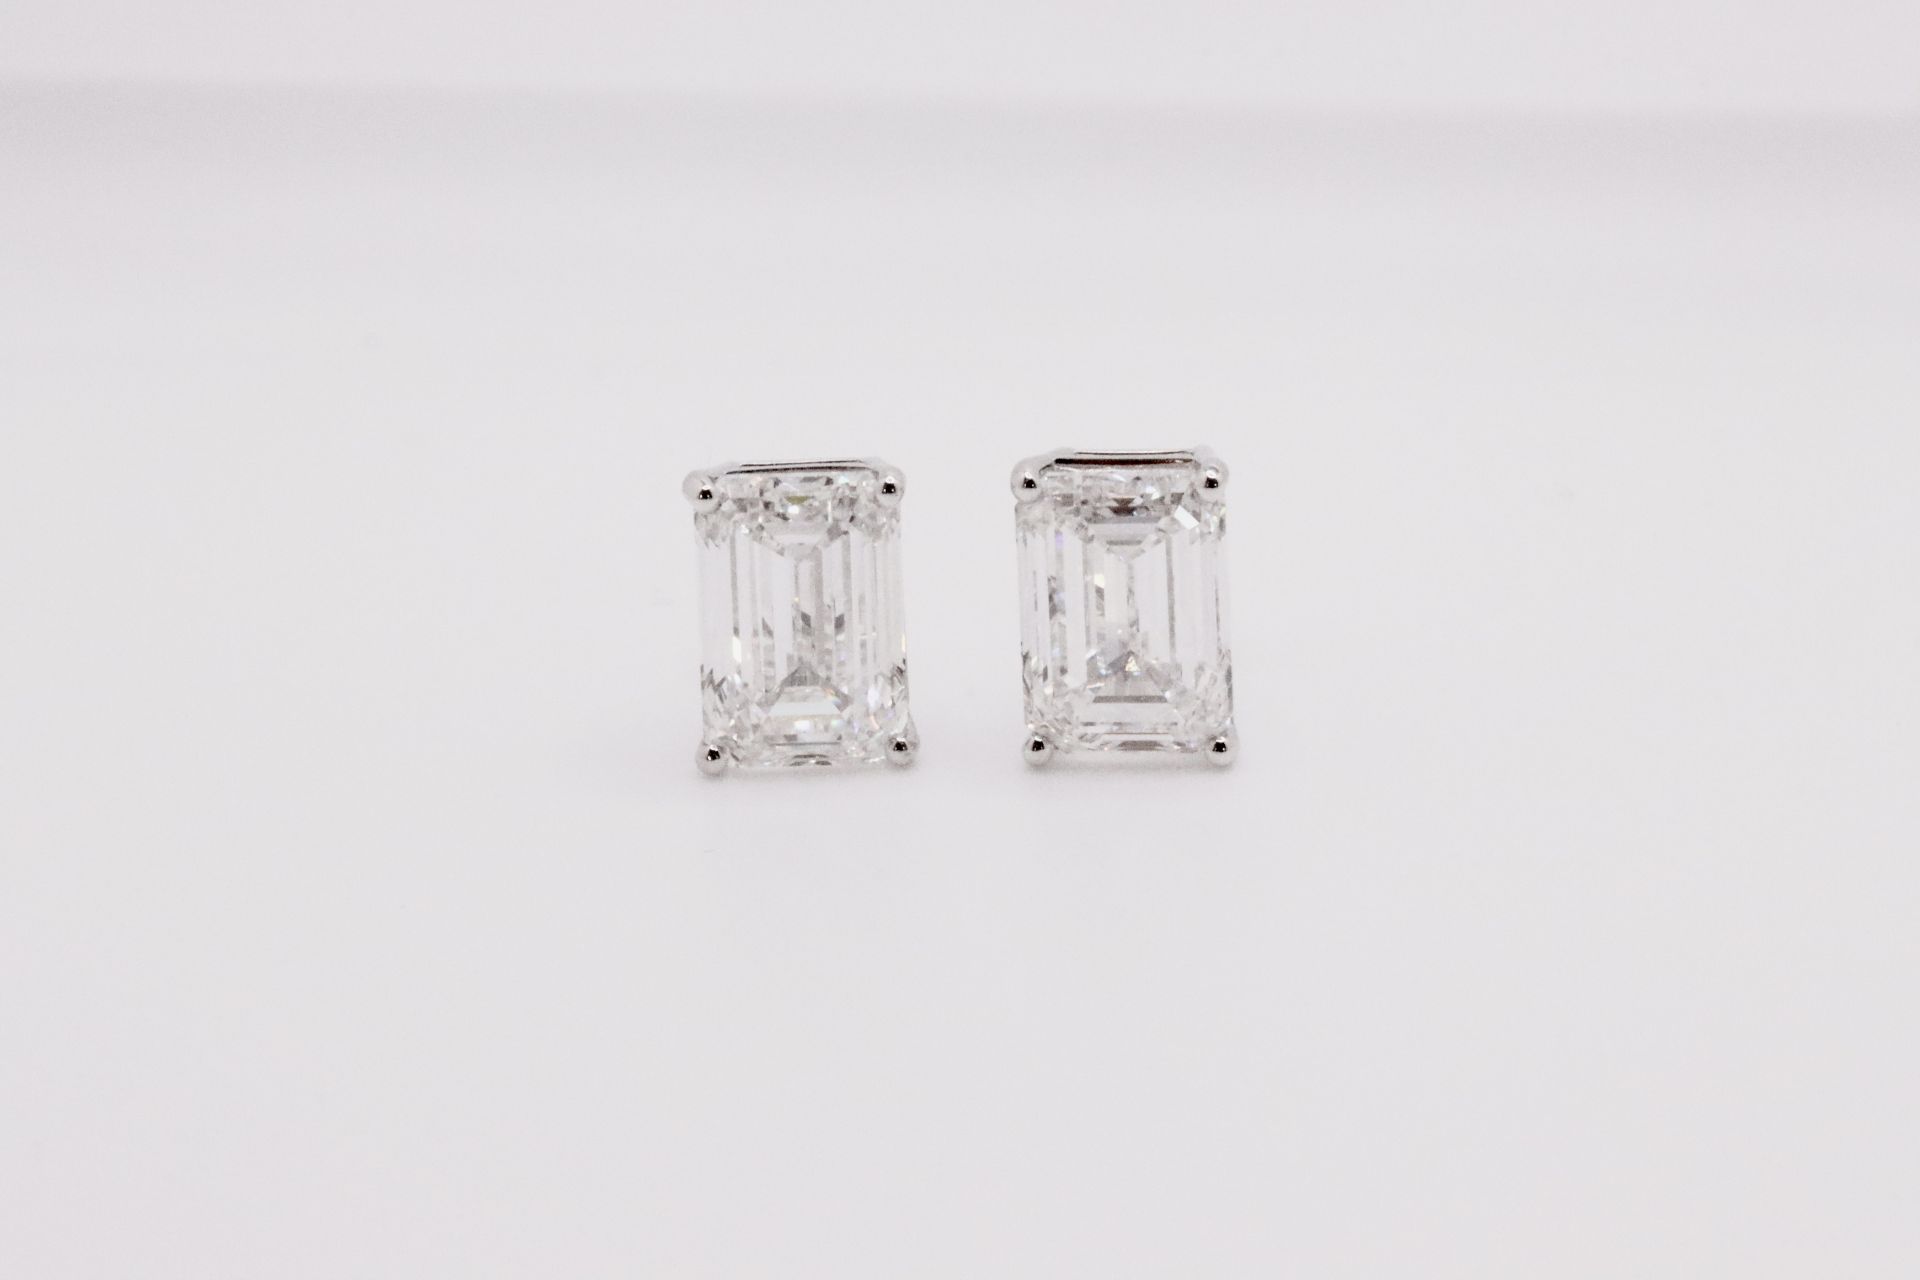 Emerald Cut 2.00 Carat Natural Diamond Earrings 18kt White Gold - Colour F - VS Clarity- GIA - Image 3 of 4